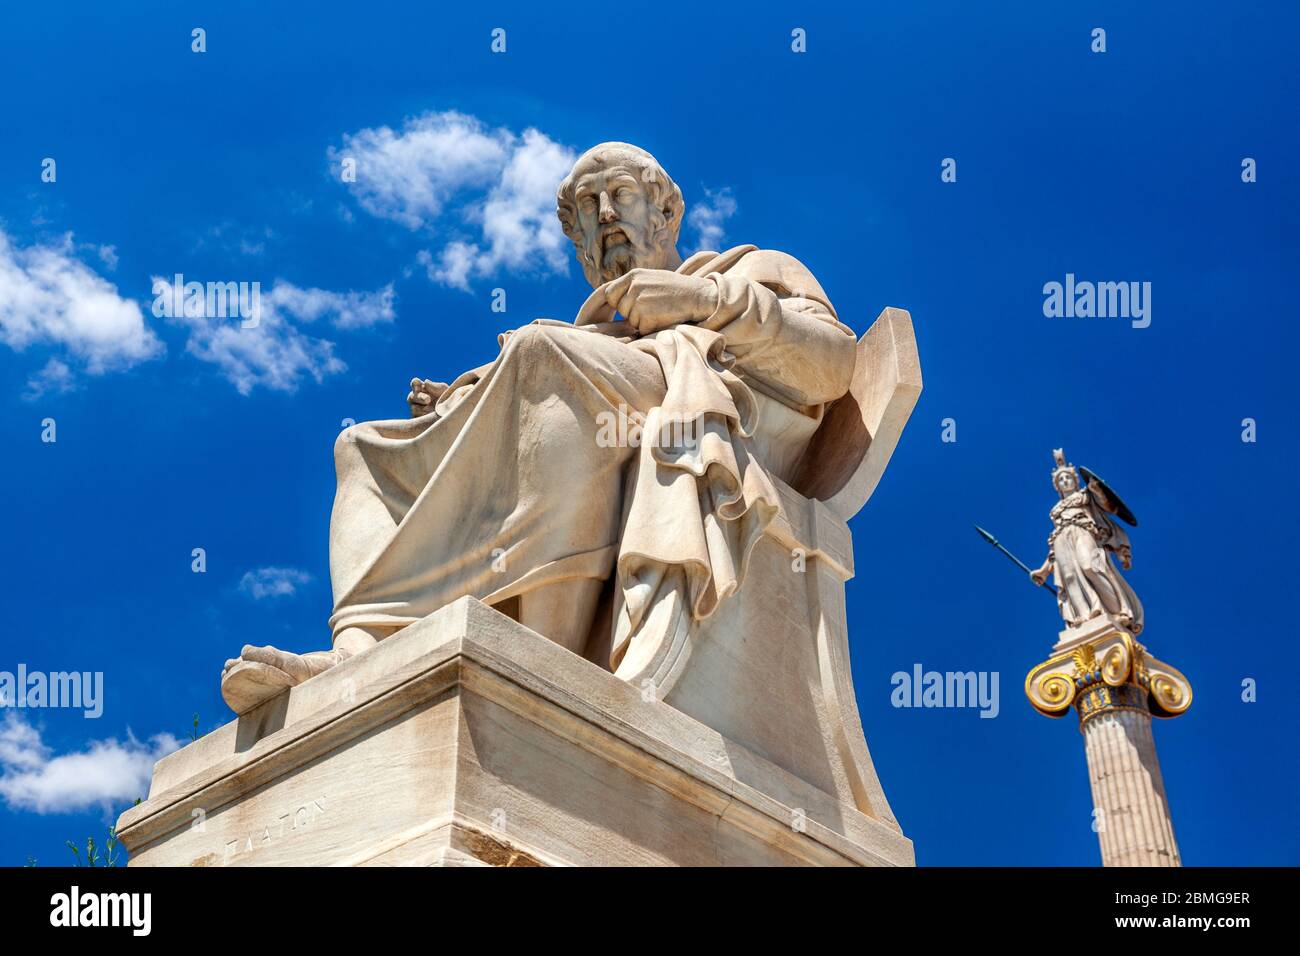 Statue of Plato in the foreground and the ancient goddess Athena at the background, in Athens, Greece. Stock Photo